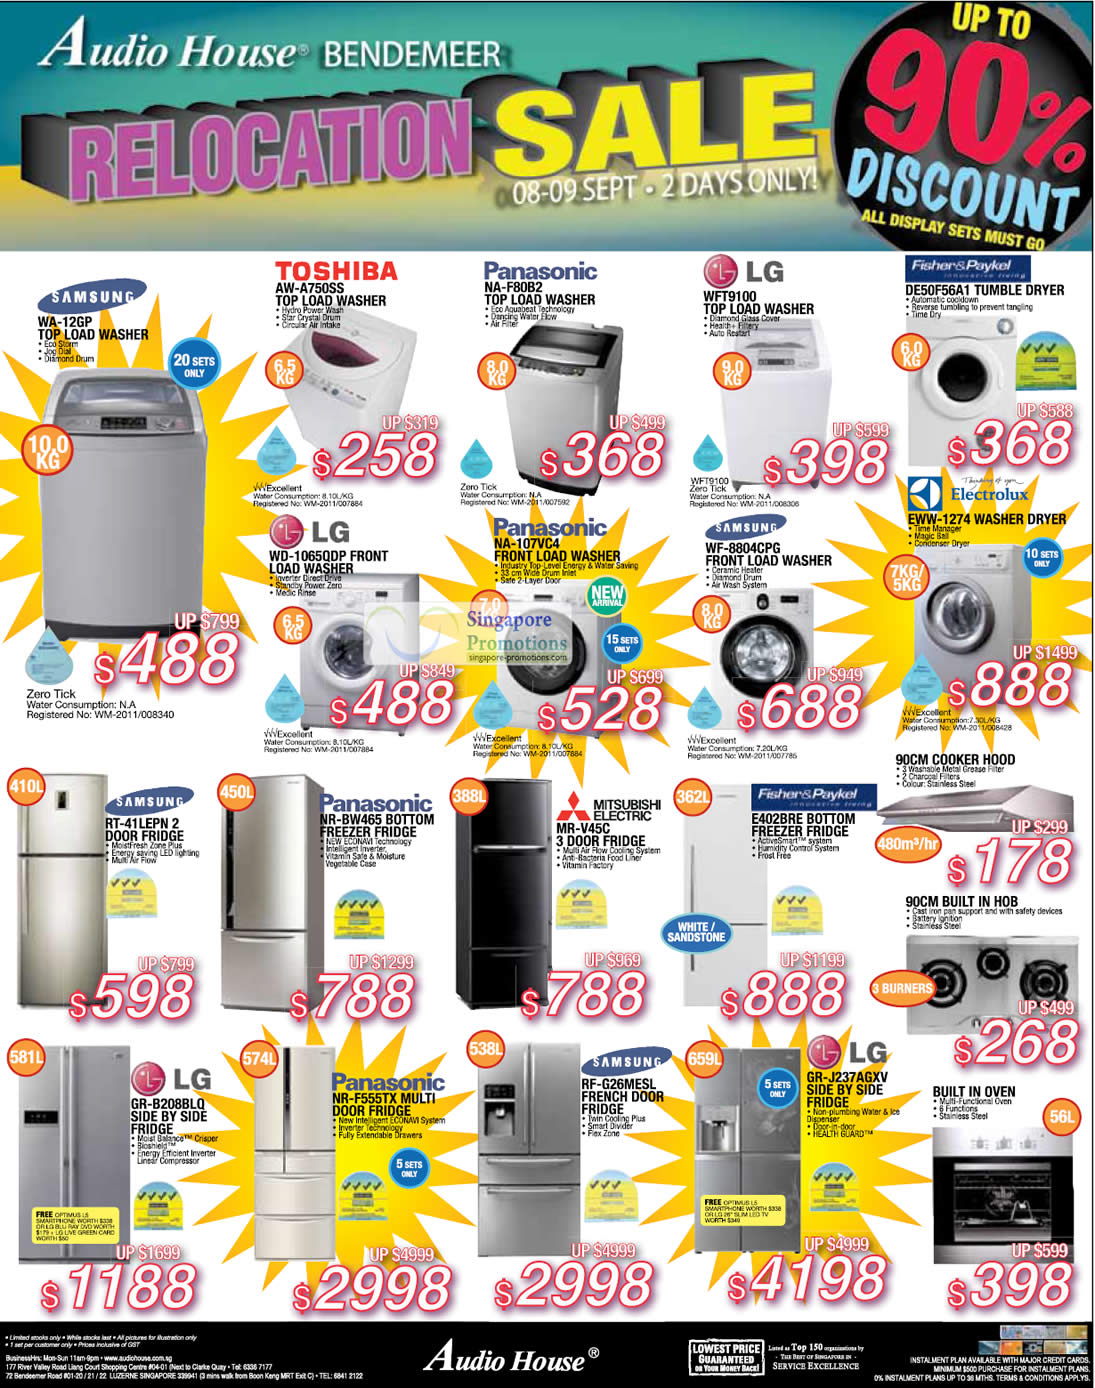 Featured image for Audio House Electronics, TV, Notebooks & Appliances Offers 8 - 9 Sep 2012